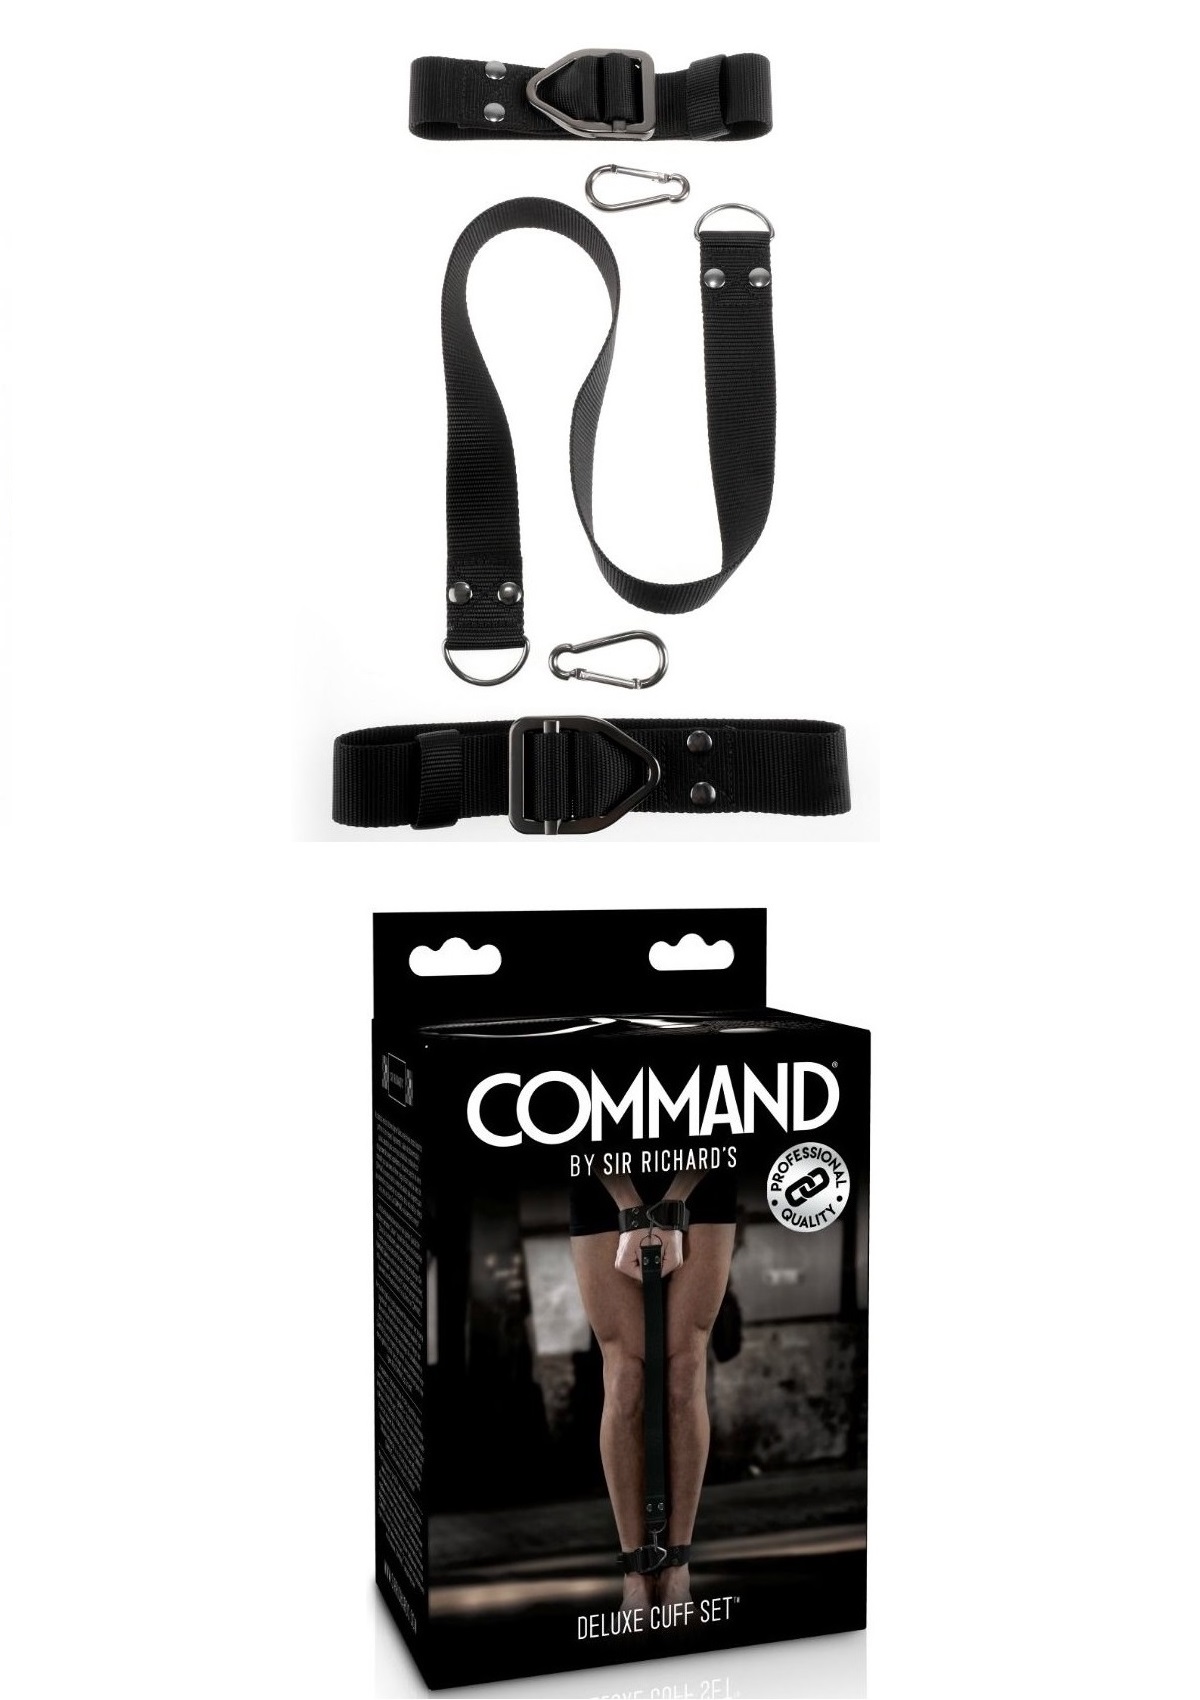 COMMAND by Sir Richard  Deluxe Cuff Set.